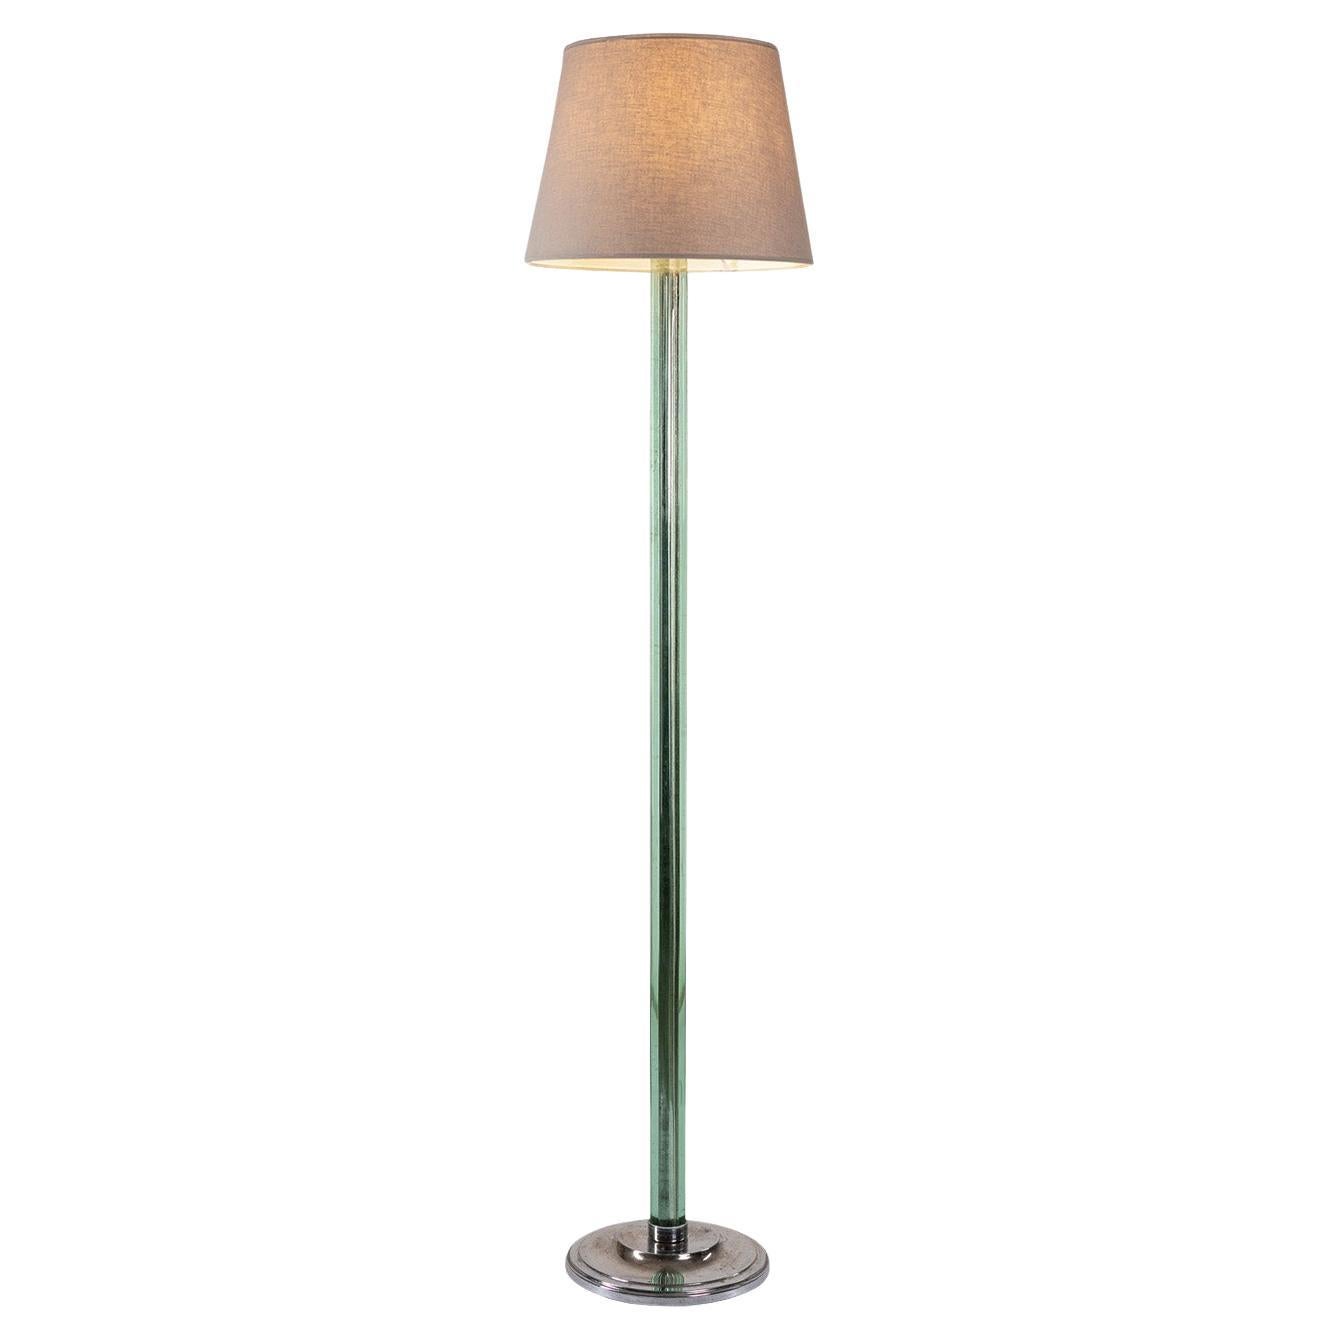 Sculptural Tall Art Deco Floor Lamp in Chrome and Glass, 1930s For Sale